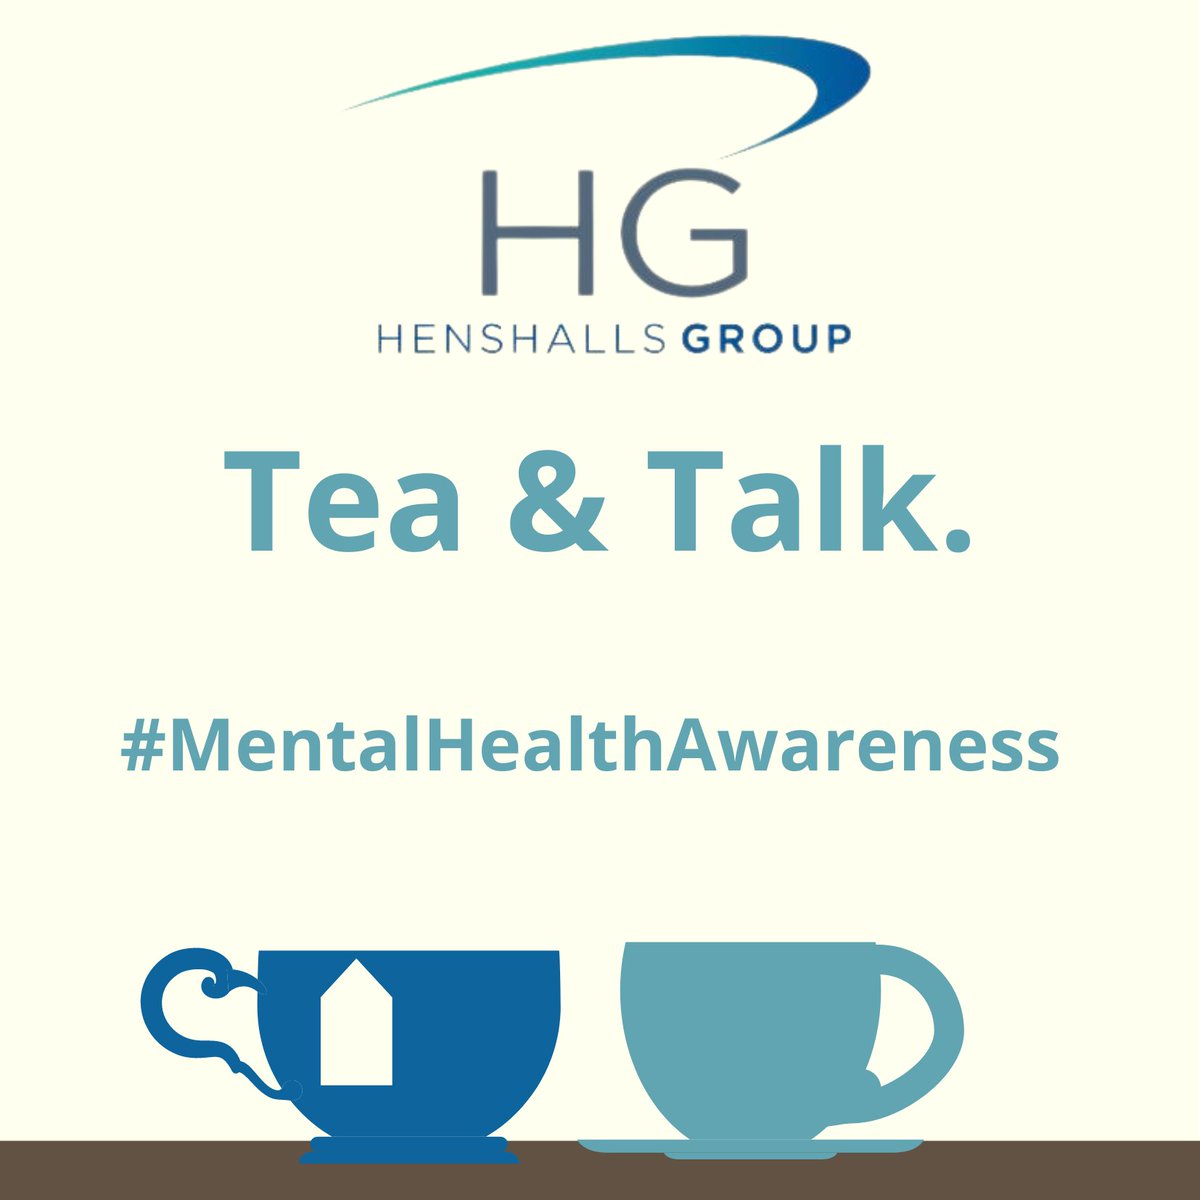 This week is #MentalHealthAwarenessWeek 💚

The theme this year is #loneliness. 😔

This week is your #reminder to check-in with your #loved ones and #bekind to those around you. ❤️

#challengementalhealthstigma 👊
#combatloneliness 🗣️
#TeaandTalk 🫖🍰
#Itsoknottobeok 👌